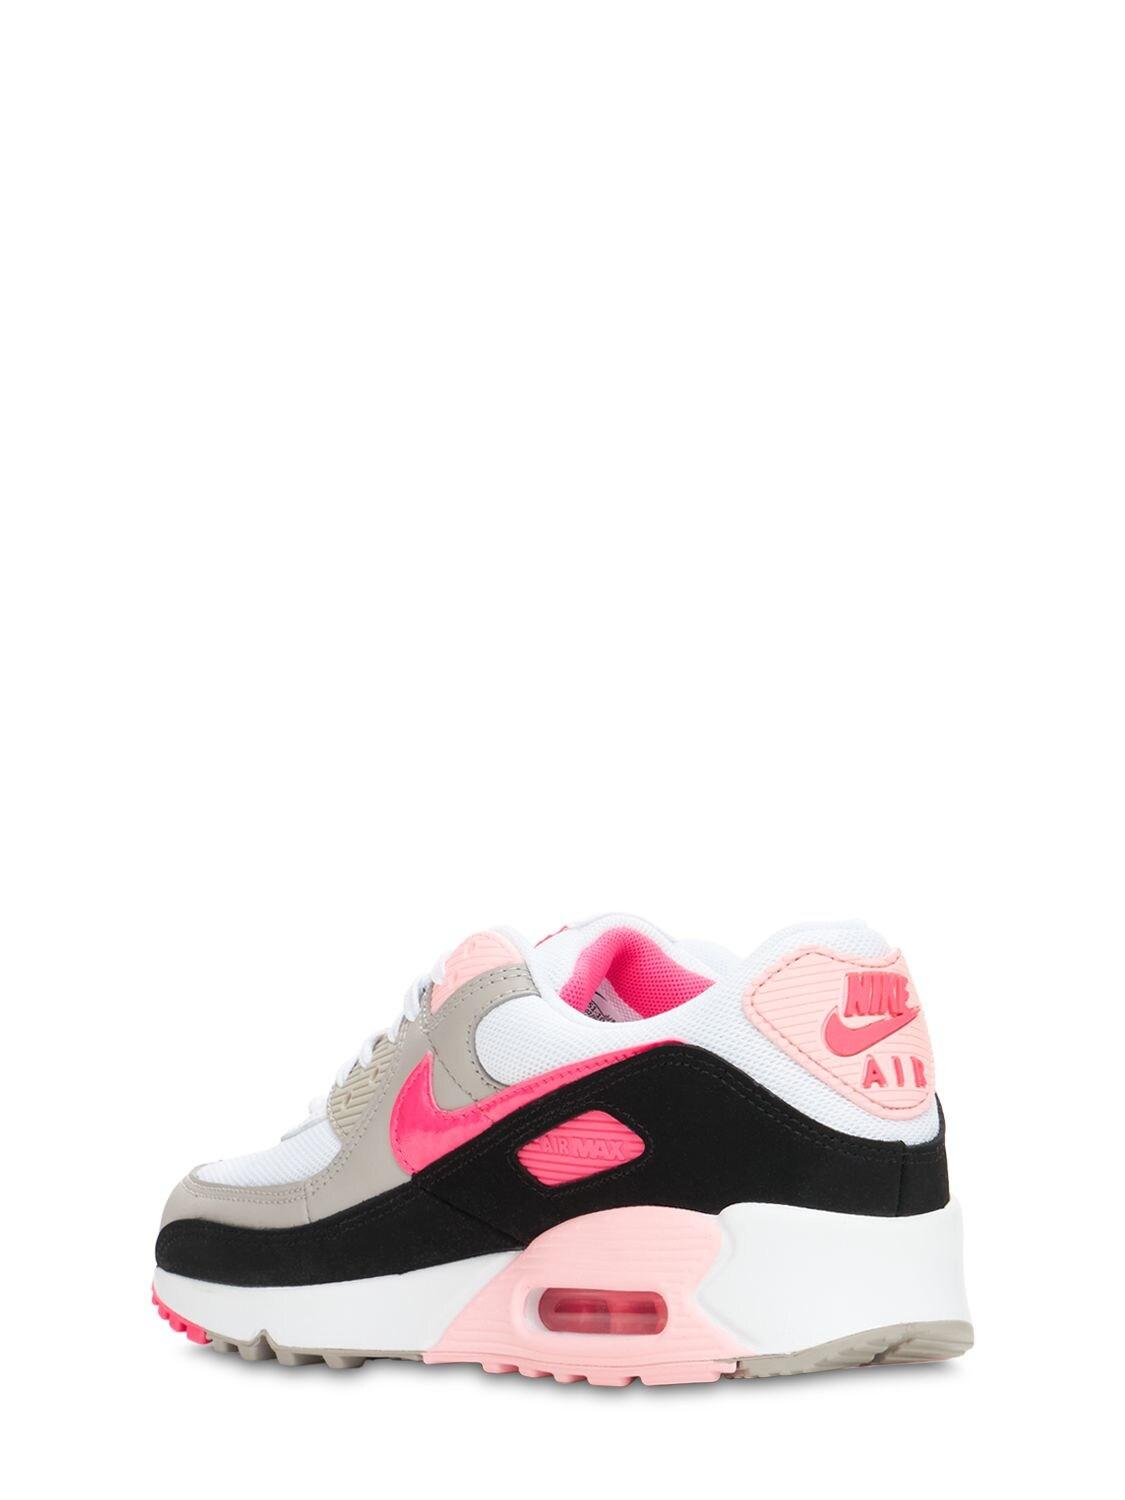 Nike Air Max 90 Sneakers in White/Pink (Pink) | Lyst